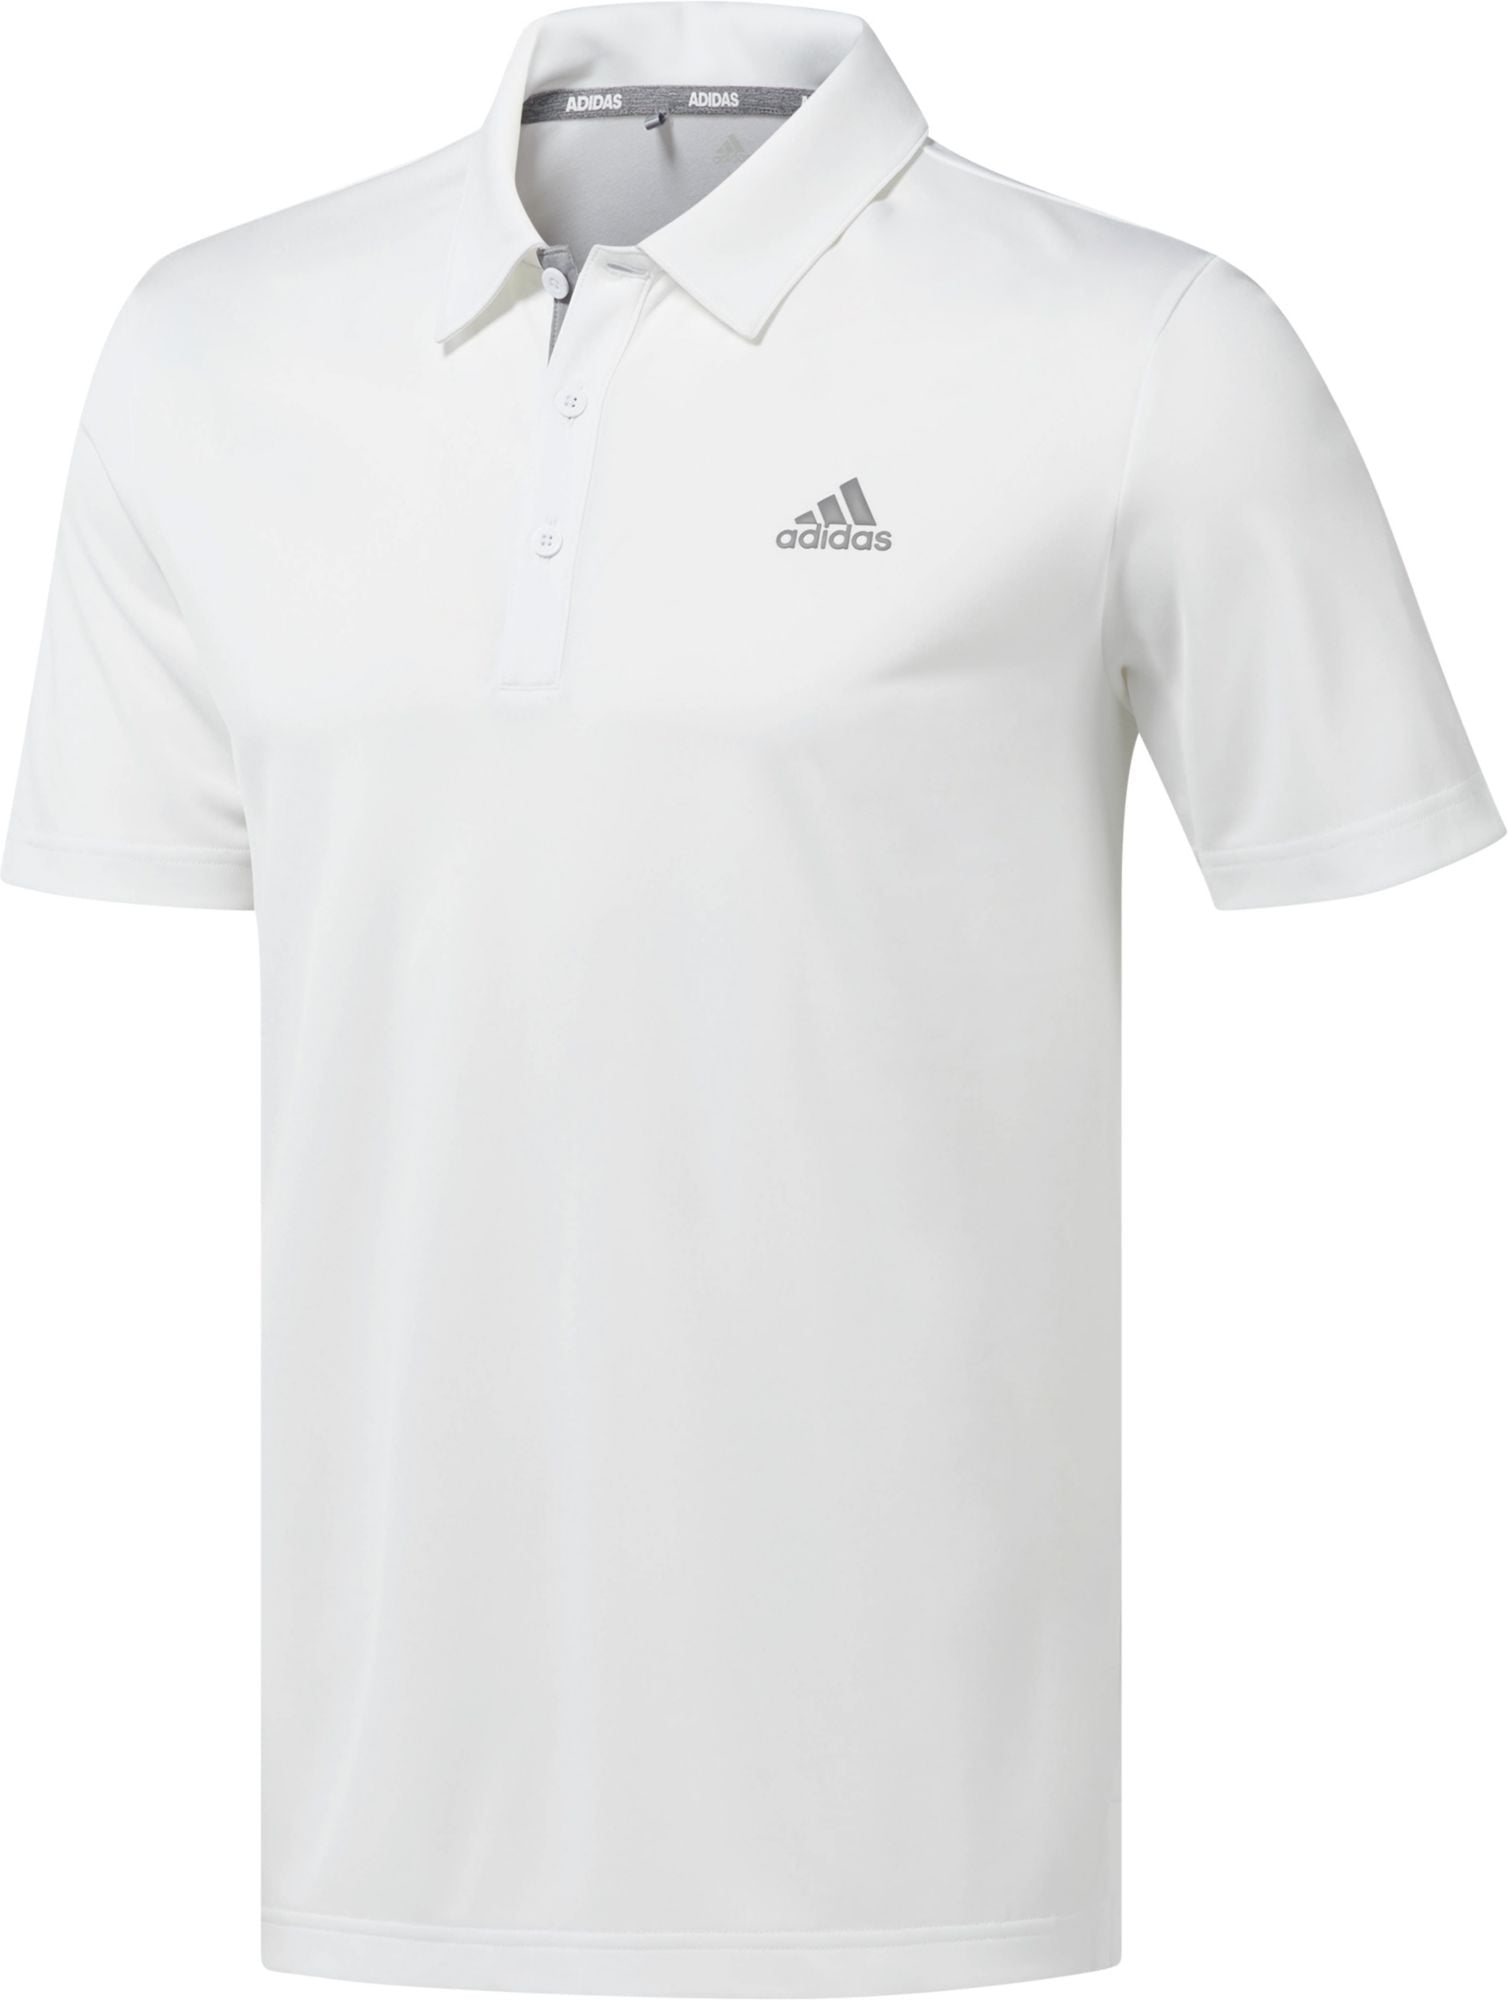 adidas men's drive novelty solid golf polo